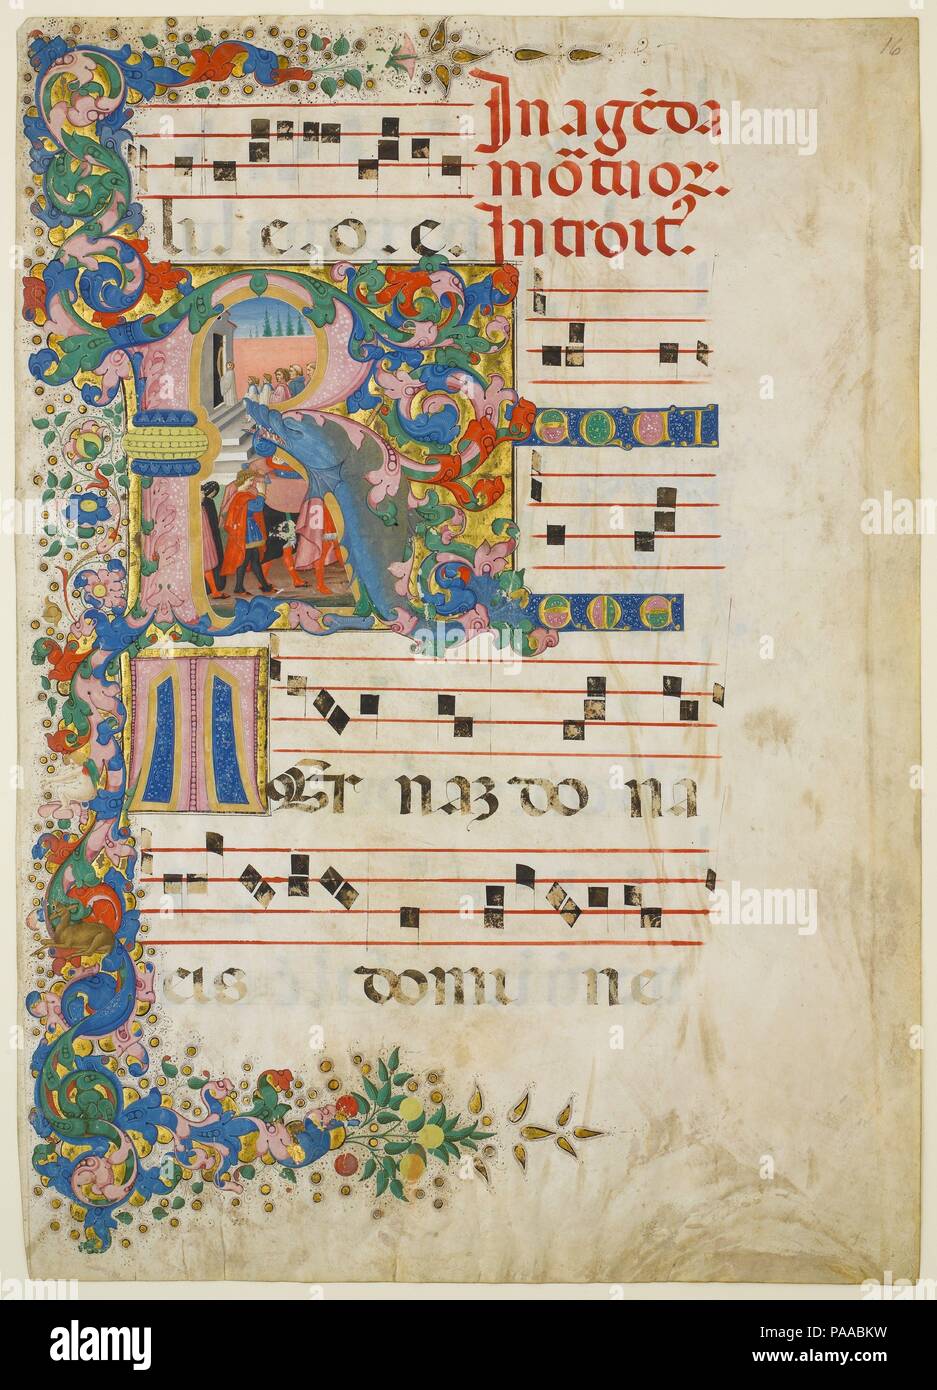 Manuscript Leaf with a Funeral Procession in an Initial R, from a Gradual. Artist: Mariano del Buono (Italian, 1433-1504). Culture: Italian. Dimensions: Overall: 28 1/8 x 20 1/16 in. (71.5 x 51 cm)  Ilumination: 8 3/16 x 8 11/16 in. (20.8 x 22.1 cm)  Mat size: 34 1/4 x 27 3/16 in. (87 x 69 cm). Date: second half 15th century.  This illumination offers a glimpse of life and death among wealthy citizens of Florence. The funeral procession is a lavish affair, with the deceased resting on a bier covered with expensive silk and the mourners attired in brightly colored costumes. Museum: Metropolitan Stock Photo